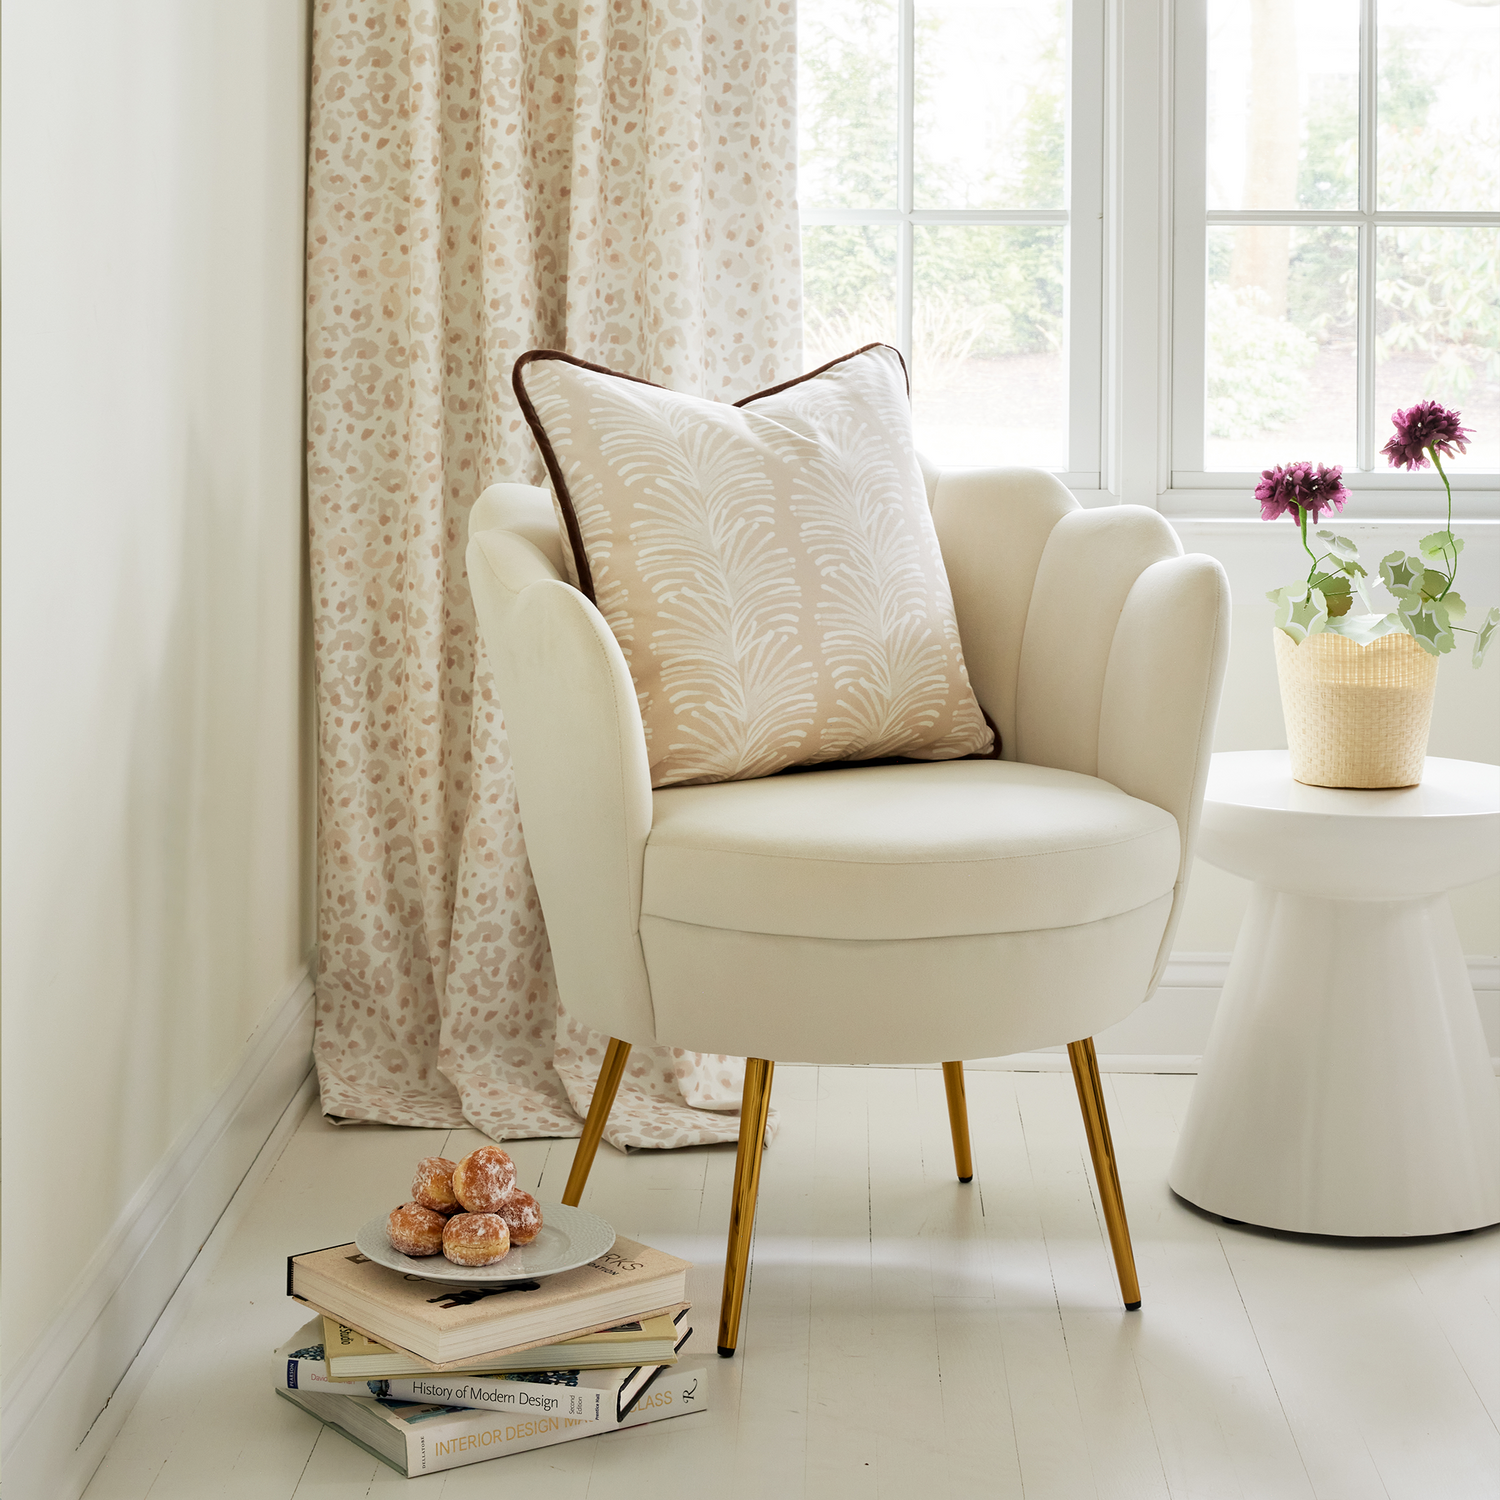 Window corner close-up styled with Beige Animal Print Curtains next to white sofa chair with a Beige Palm Printed Pillow by a small white circular table with flowers in clay pot on top. Stacked books on floor with dessert plate on top.